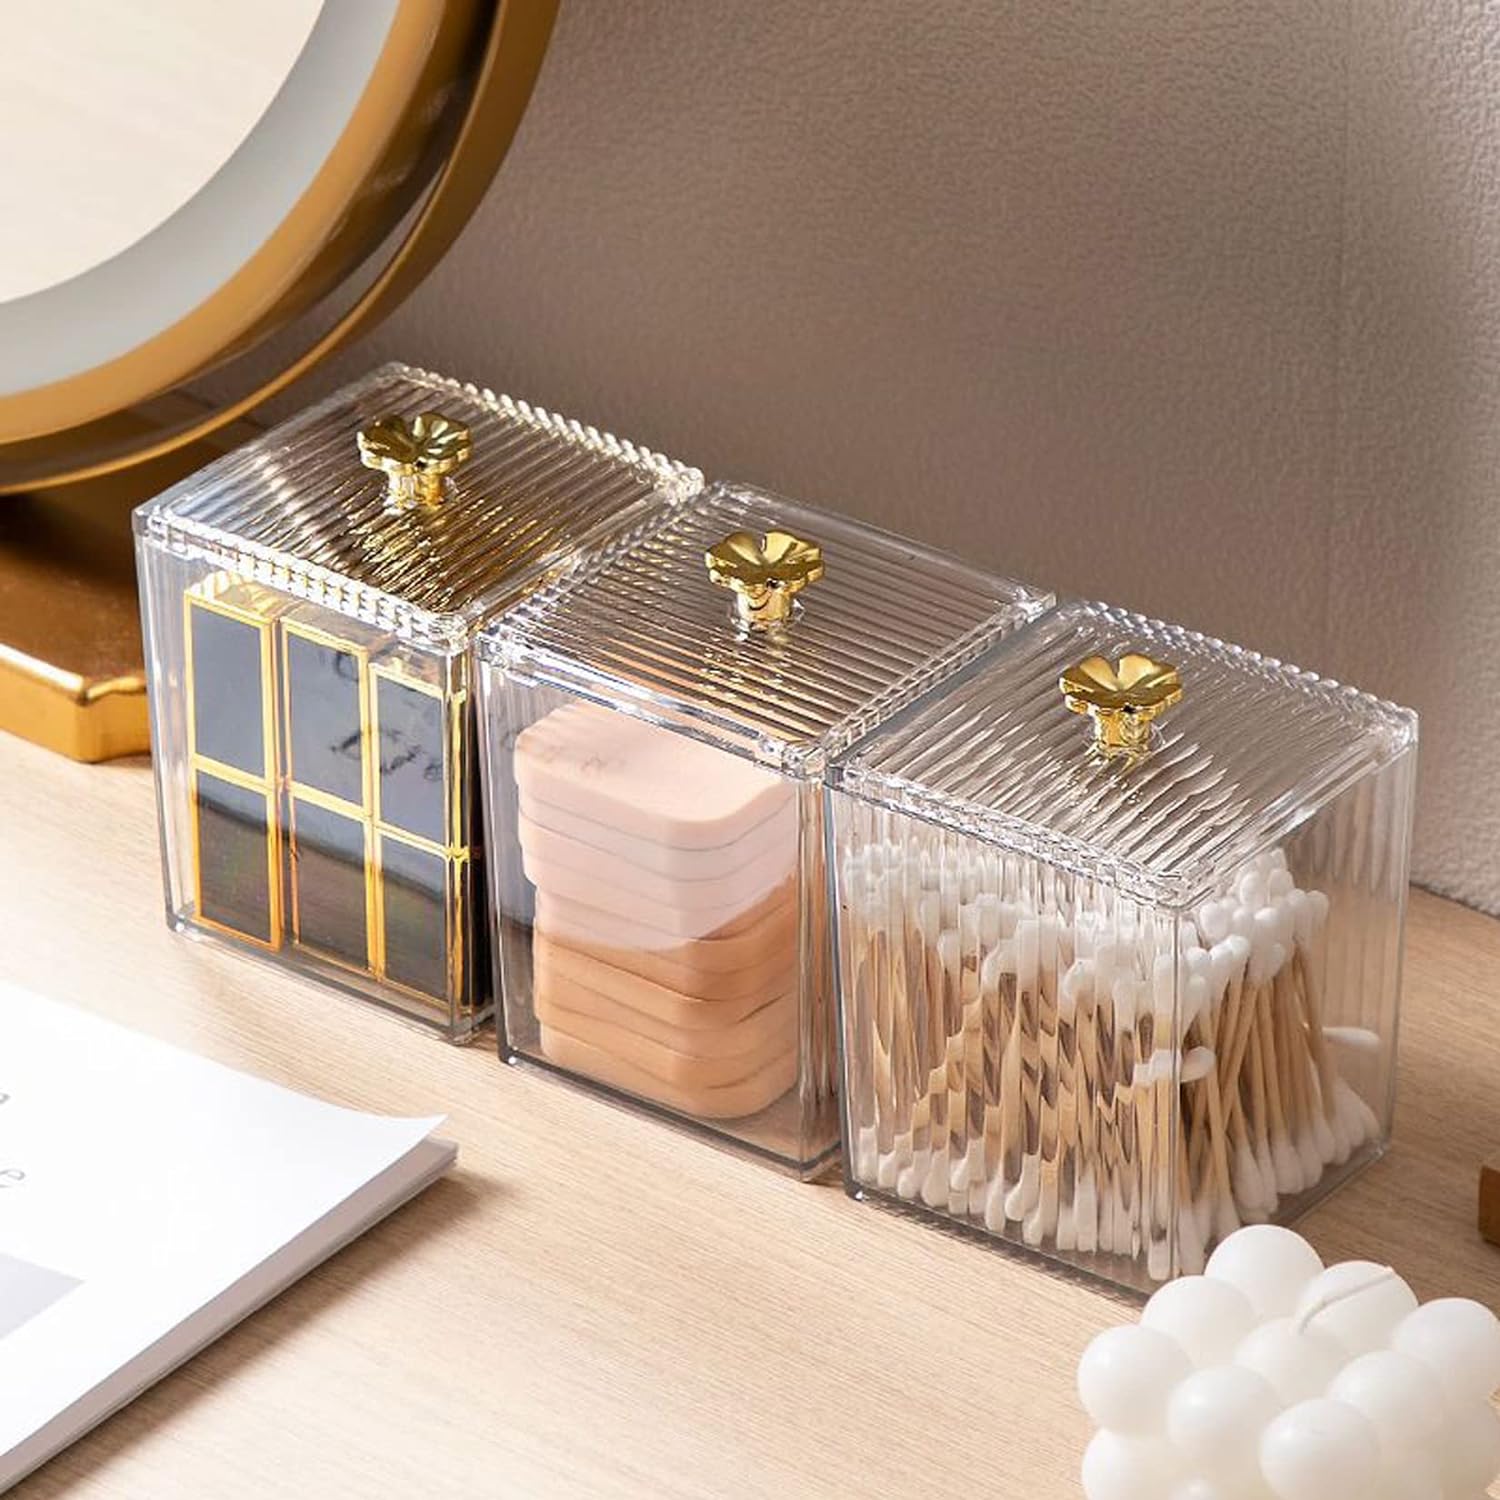 The dressing rack organizer is made of clear acrylic, one piece of suitable size